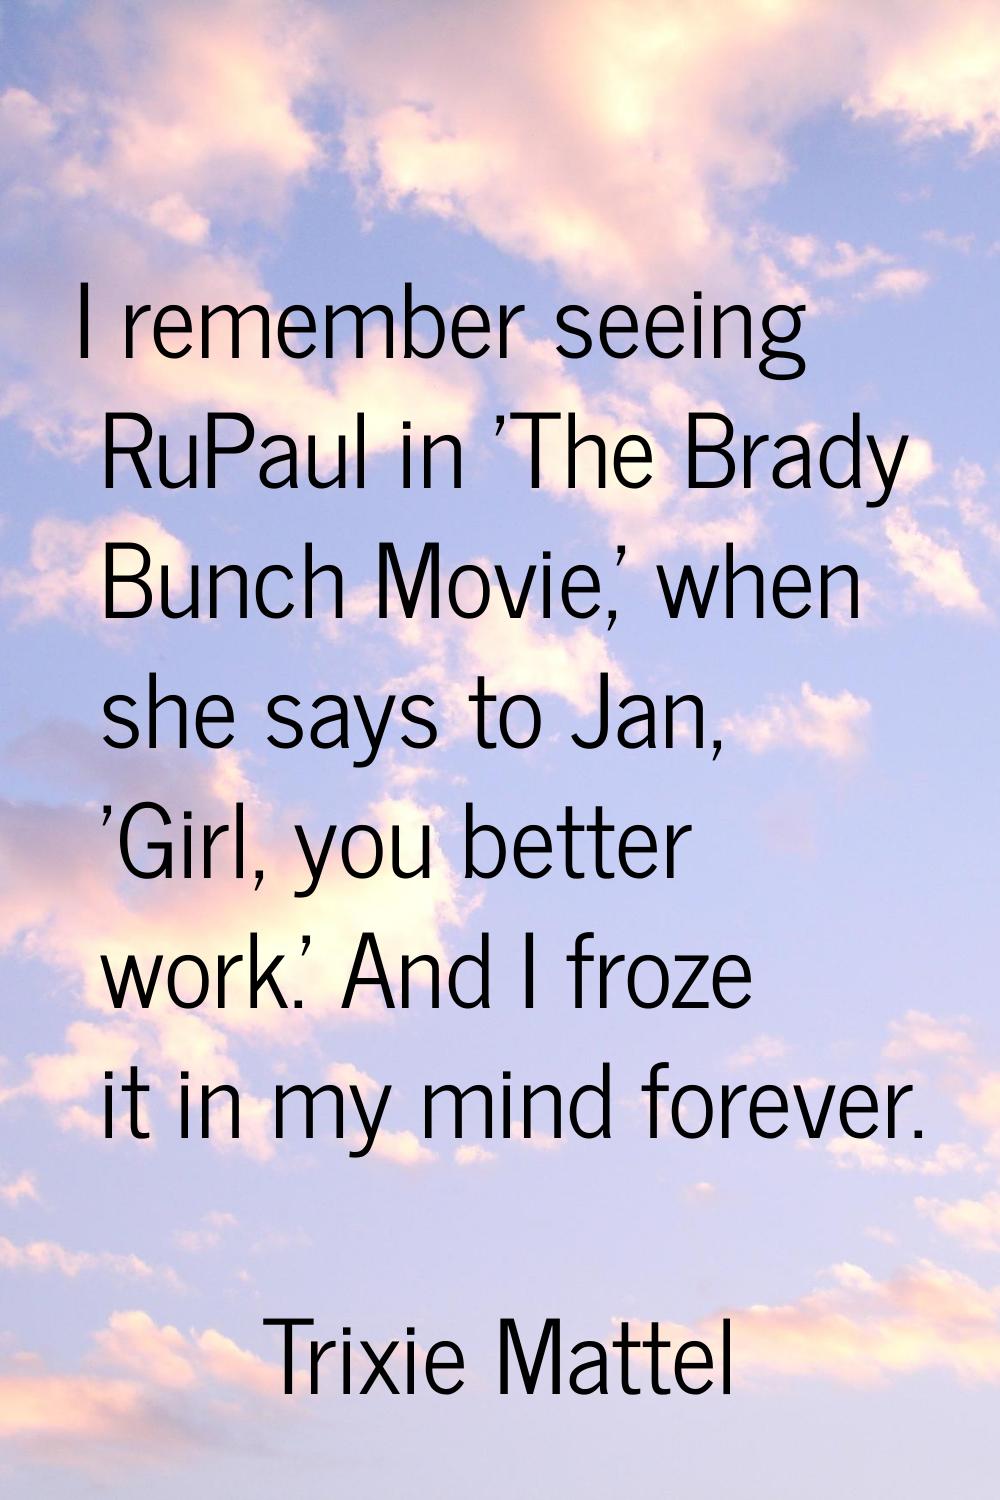 I remember seeing RuPaul in 'The Brady Bunch Movie,' when she says to Jan, 'Girl, you better work.'